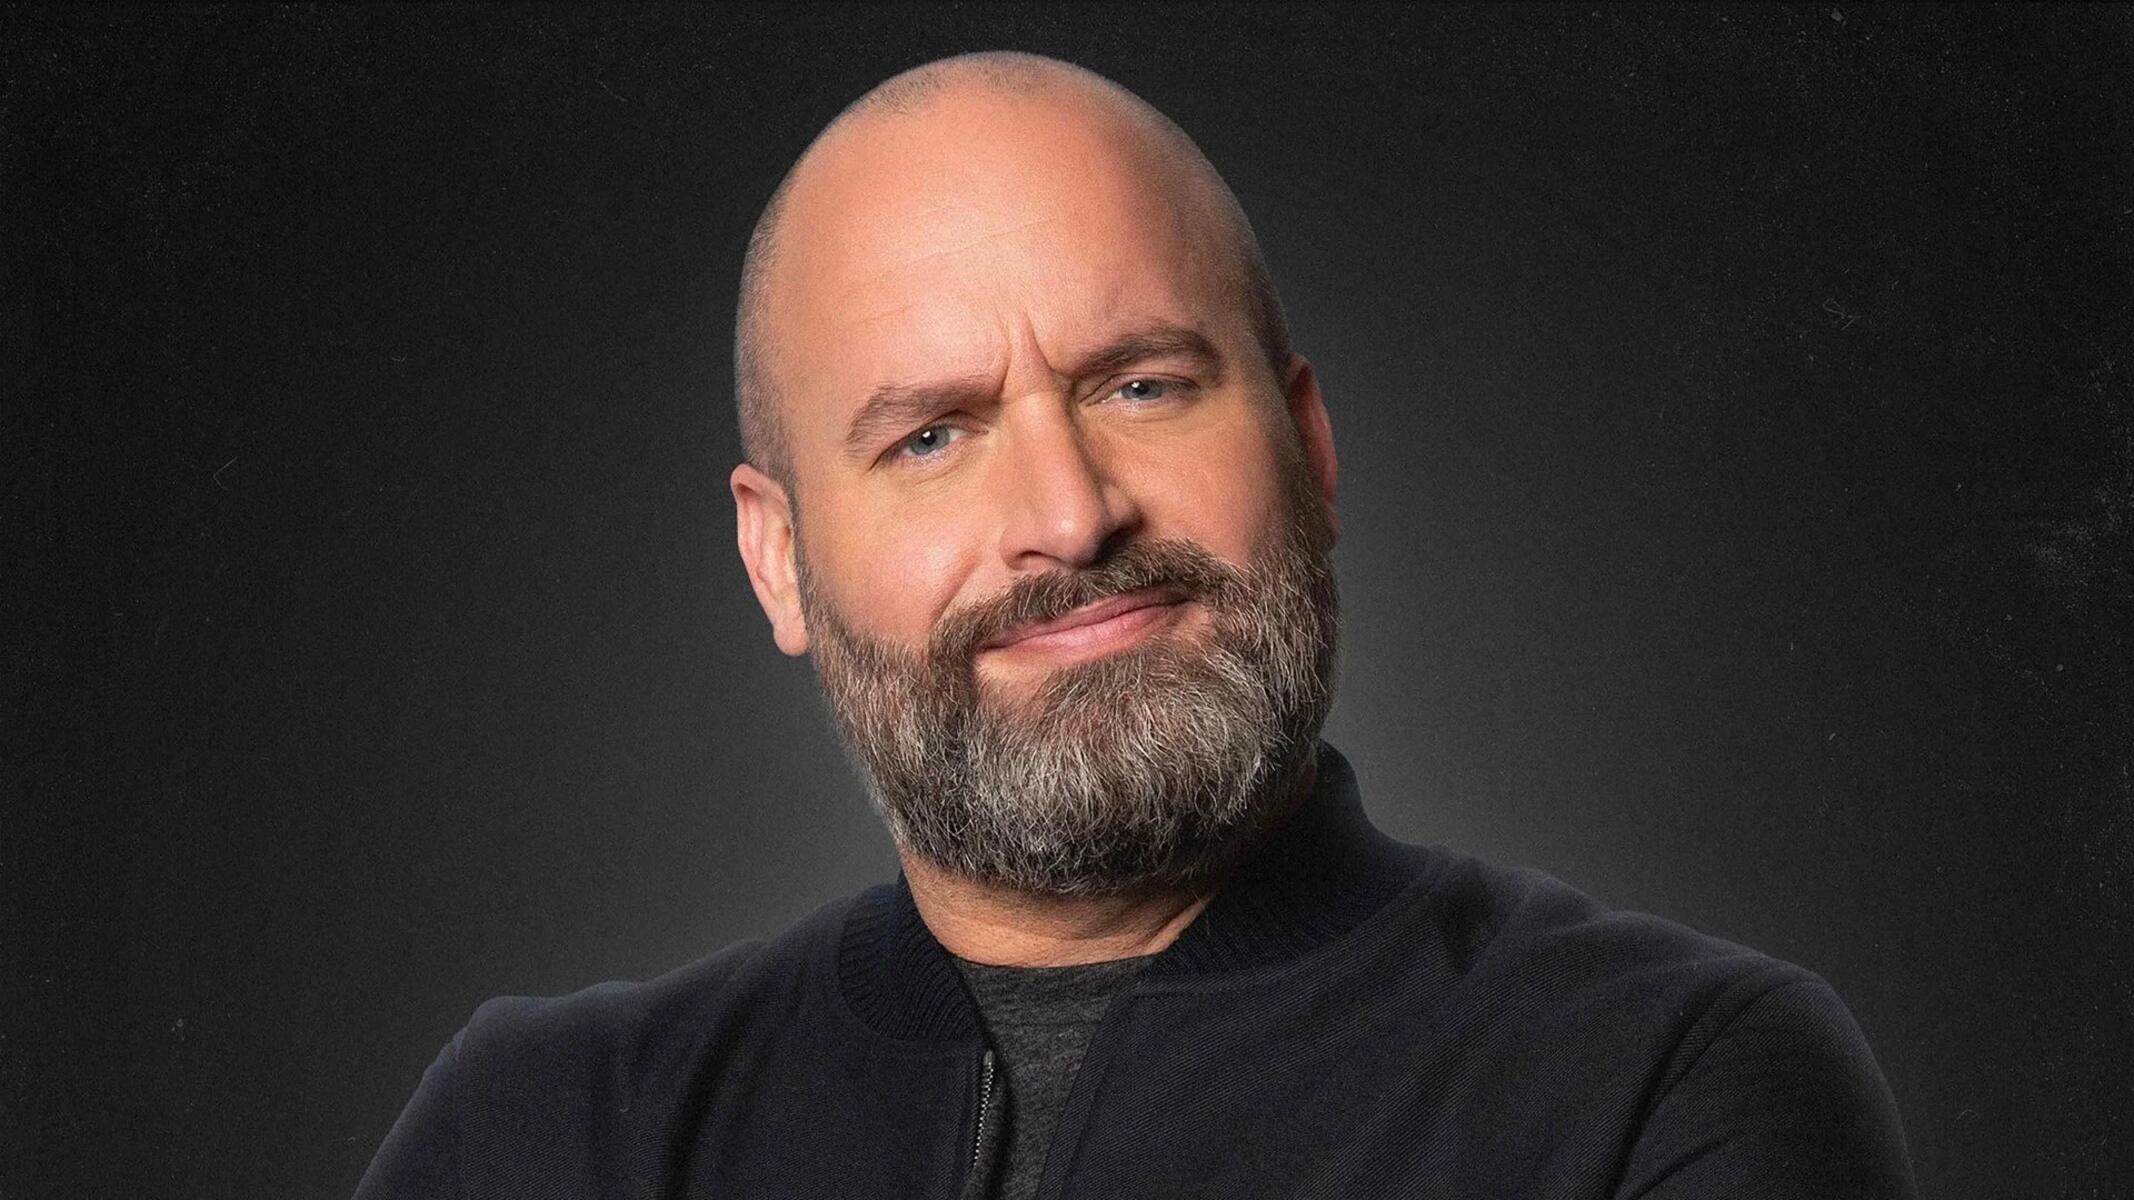 9 Enigmatic Facts About Tom Segura - Facts.net